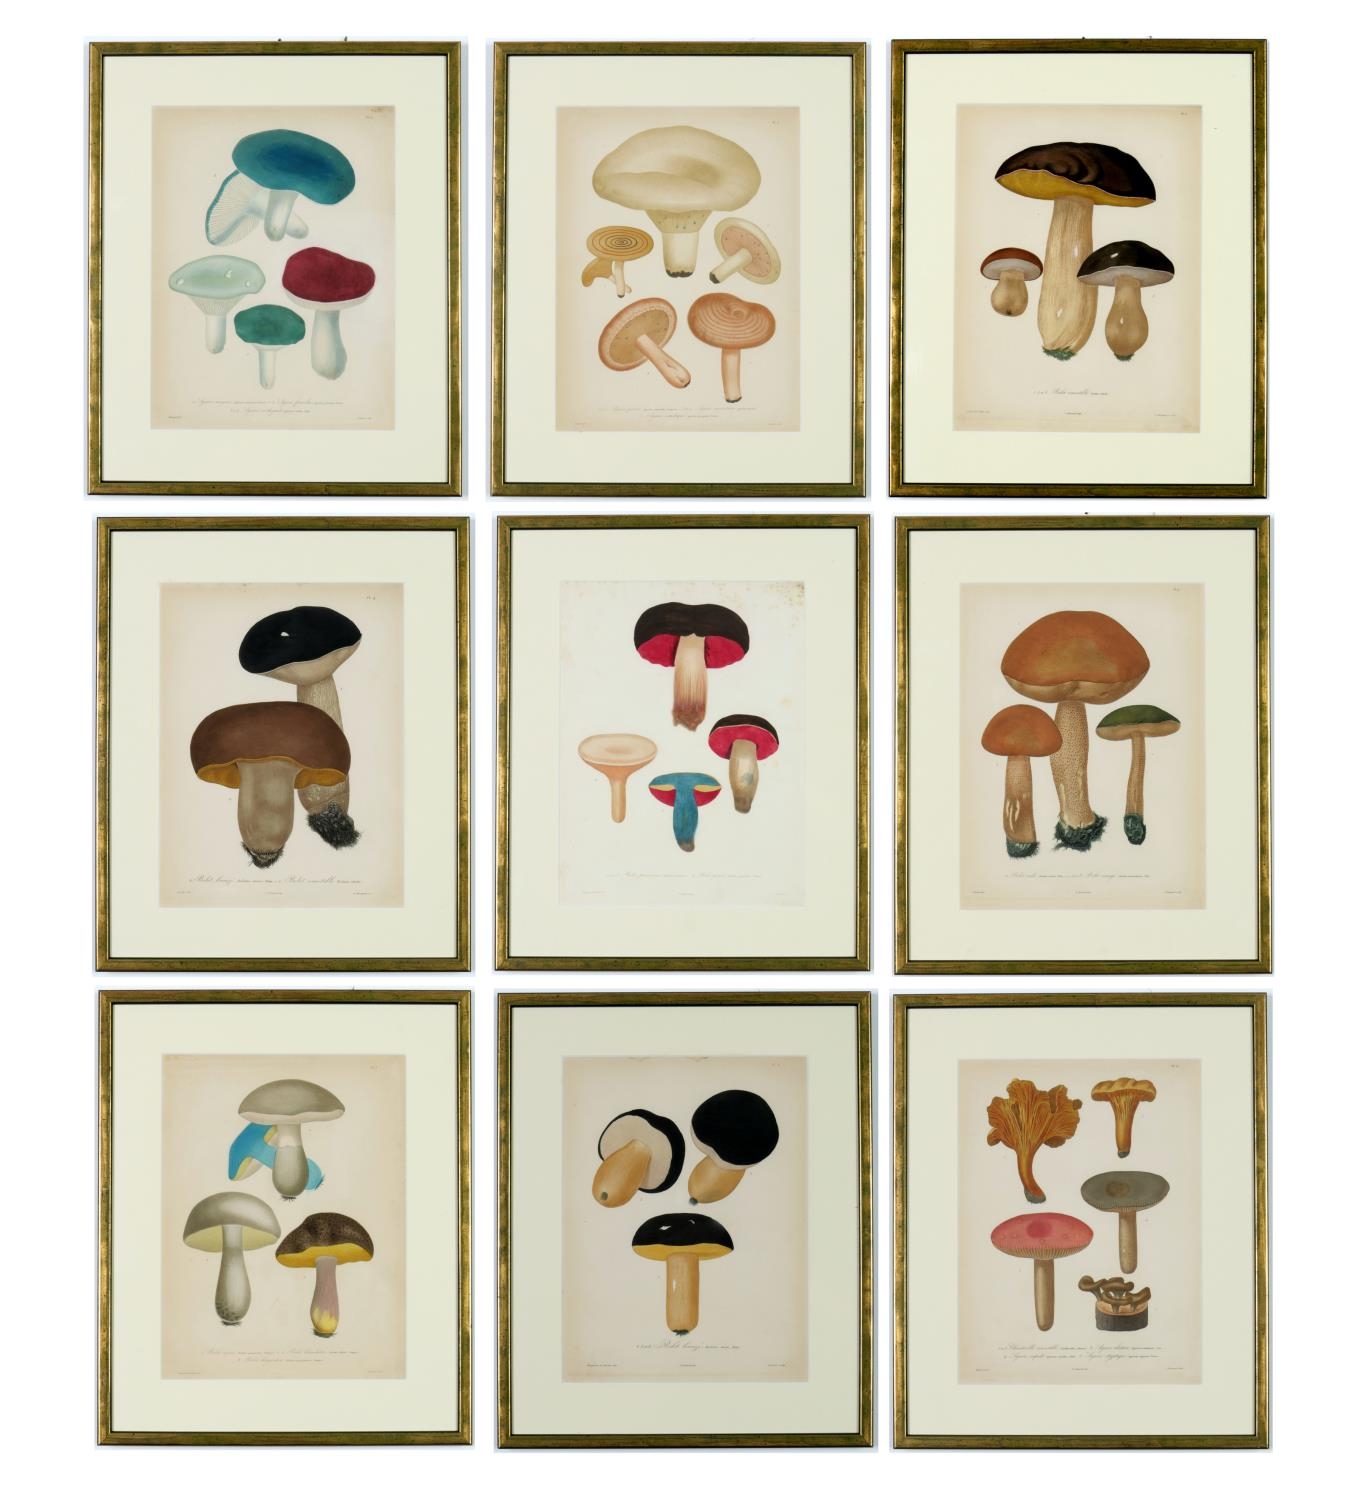 JOSEPH ROQUES, Mushrooms, a set of nine rare engravings with hand colouring, 1864, Victor Masson